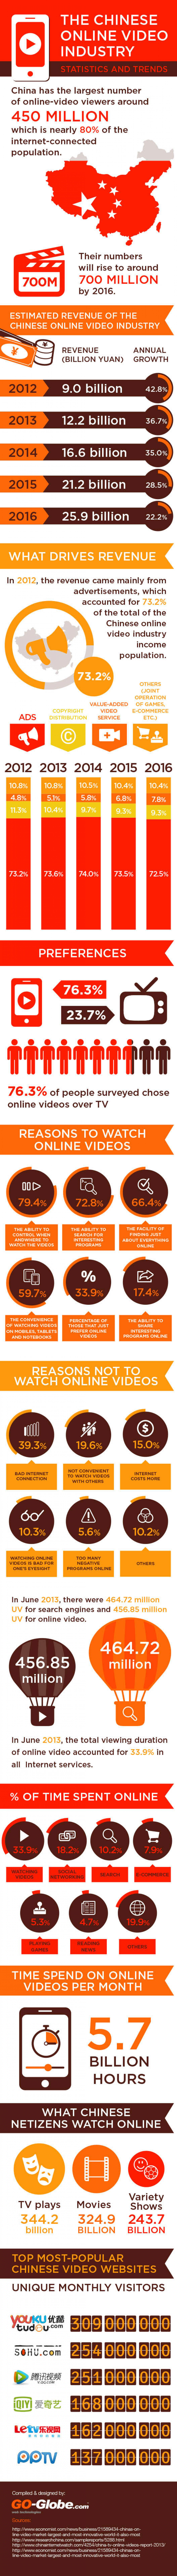 Online Video Market in China - Statistics and Trends [Infographic] Infographic